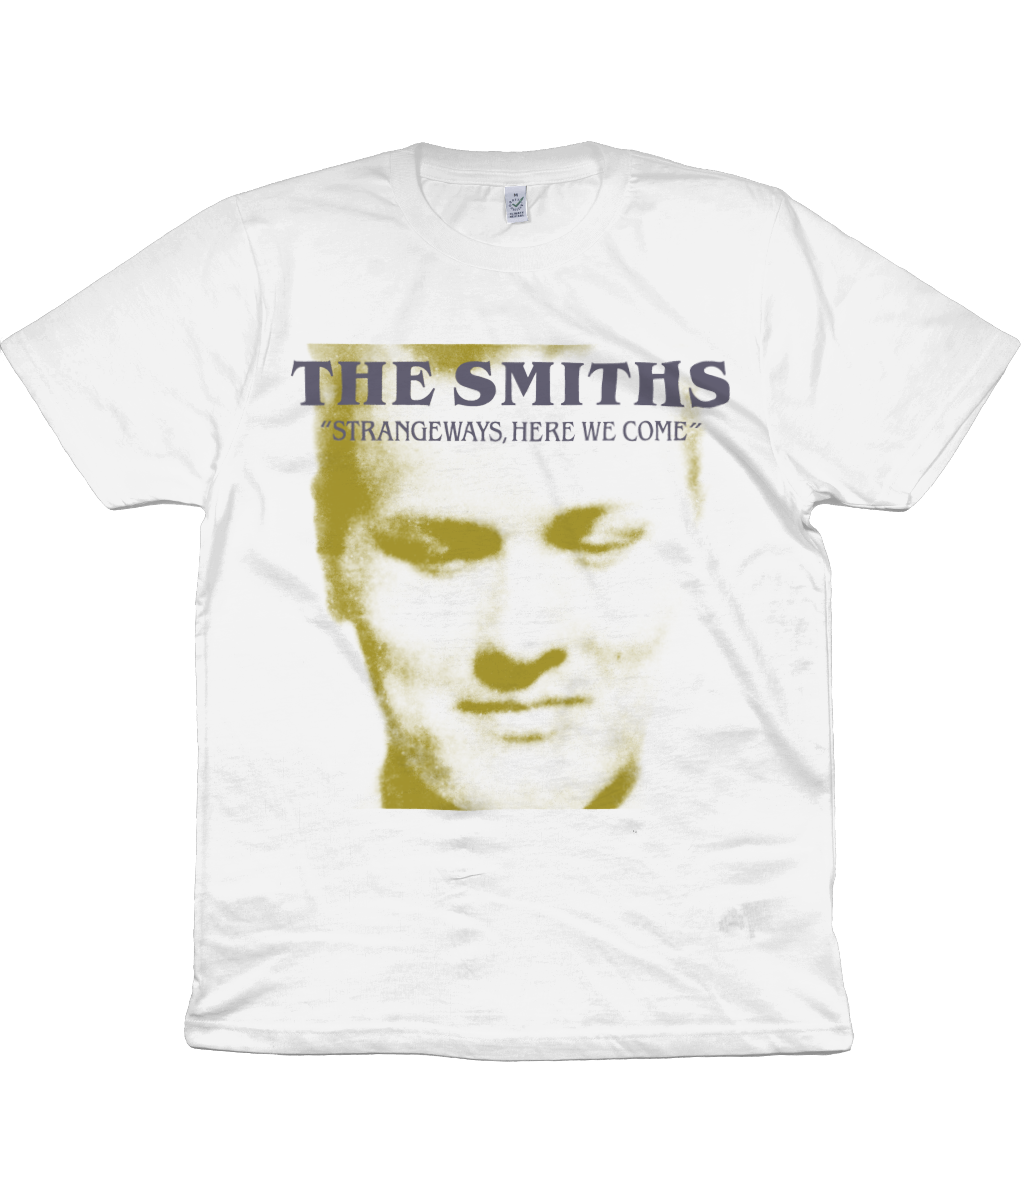 THE SMITHS - STRANGEWAYS, HERE WE COME - 1987 Promo - Gold & Grey - Front Print